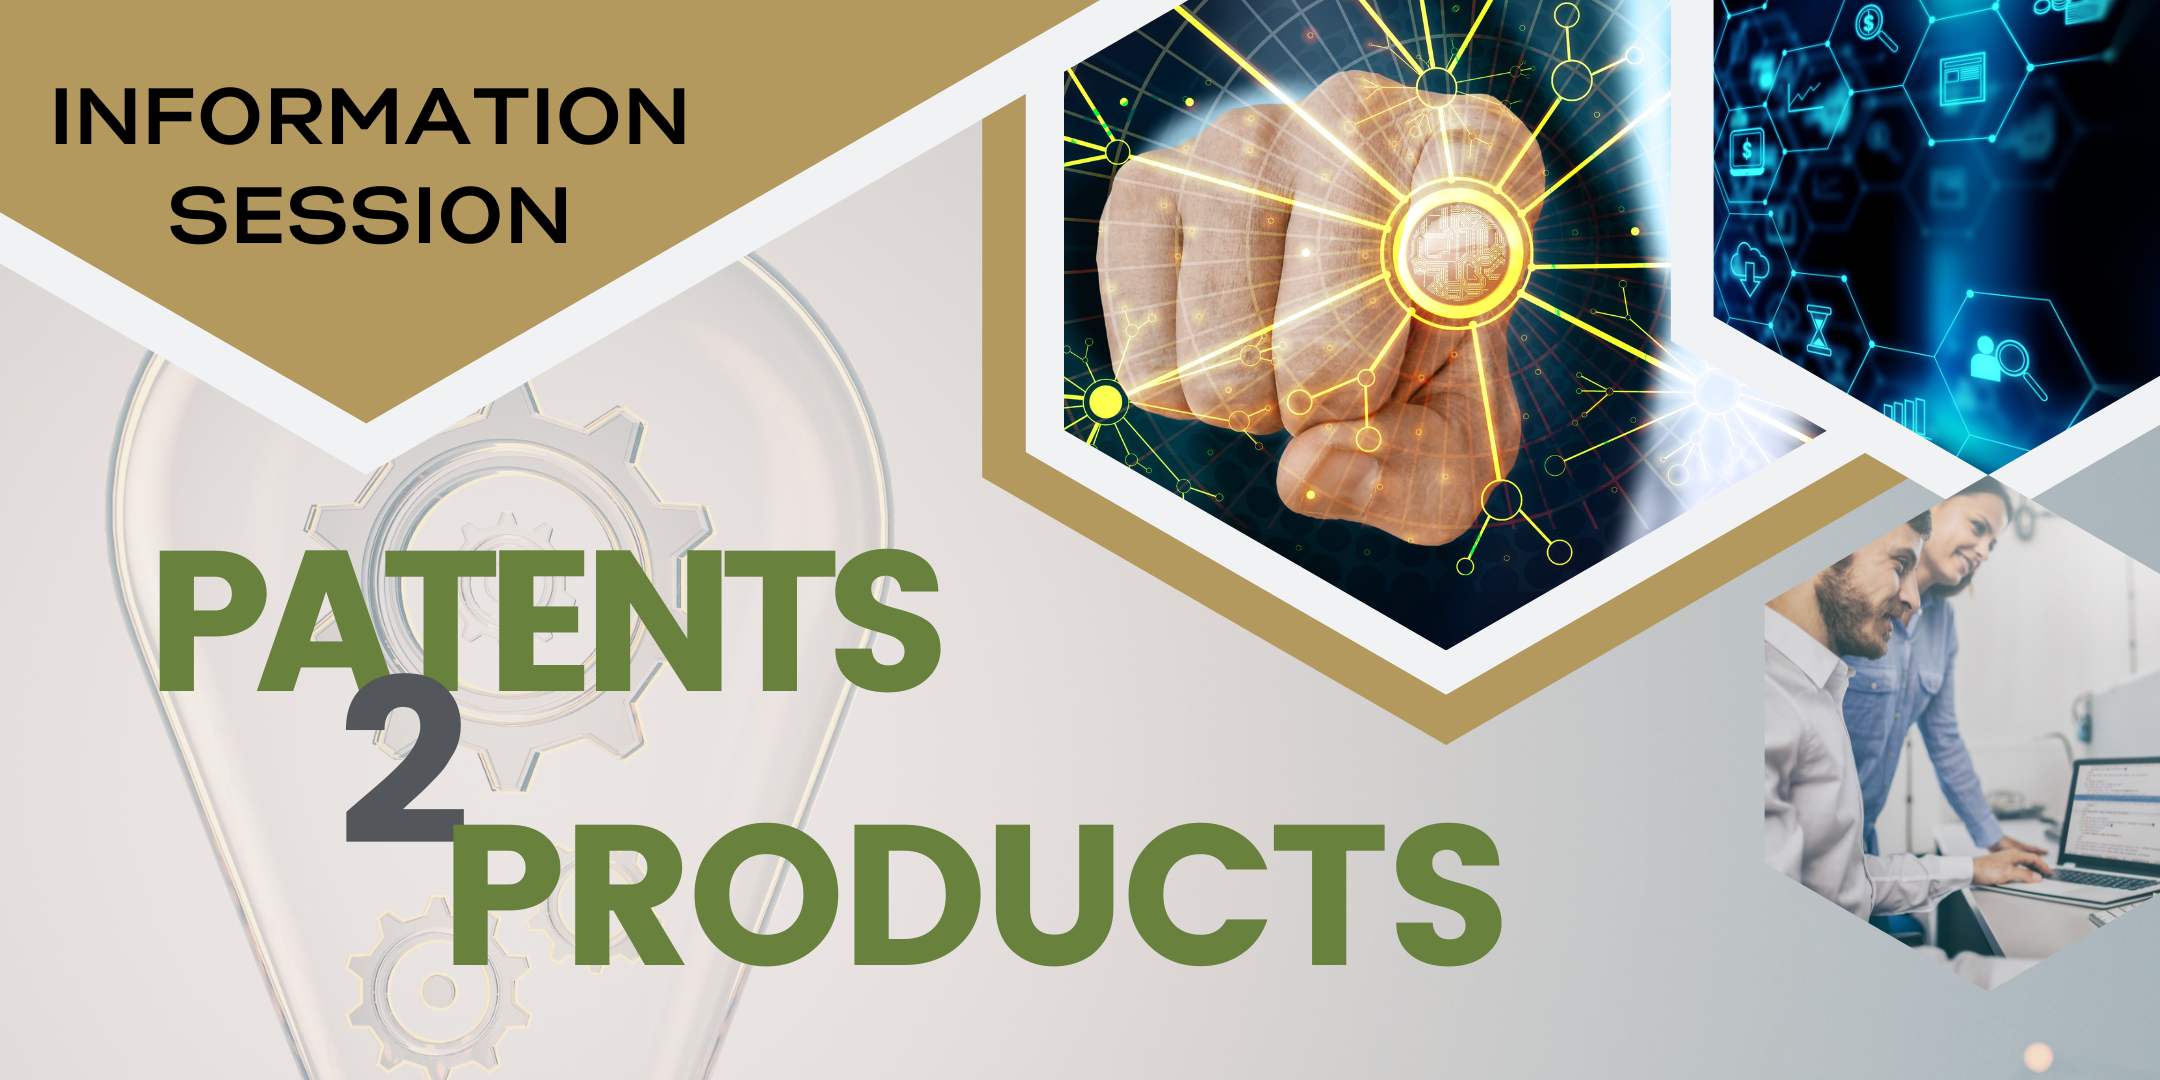 Patents2Products Information Session